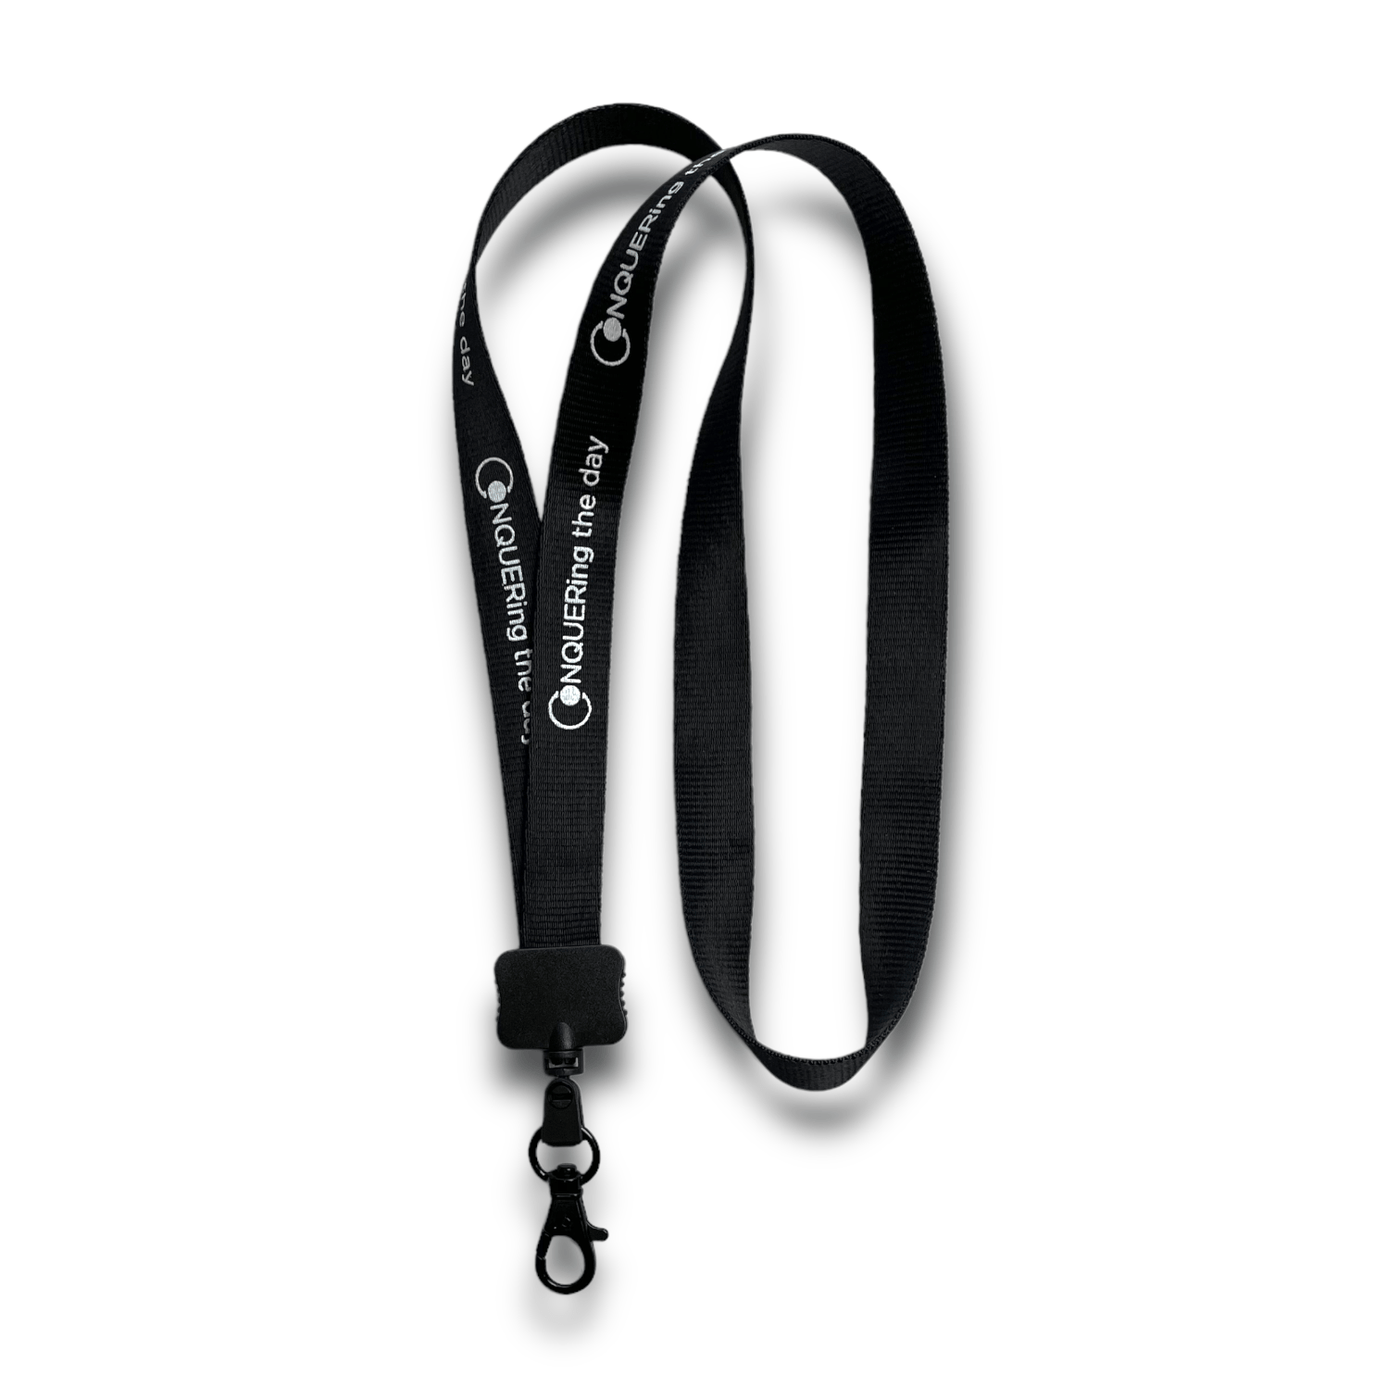 "CONQUERing the day" Lanyard